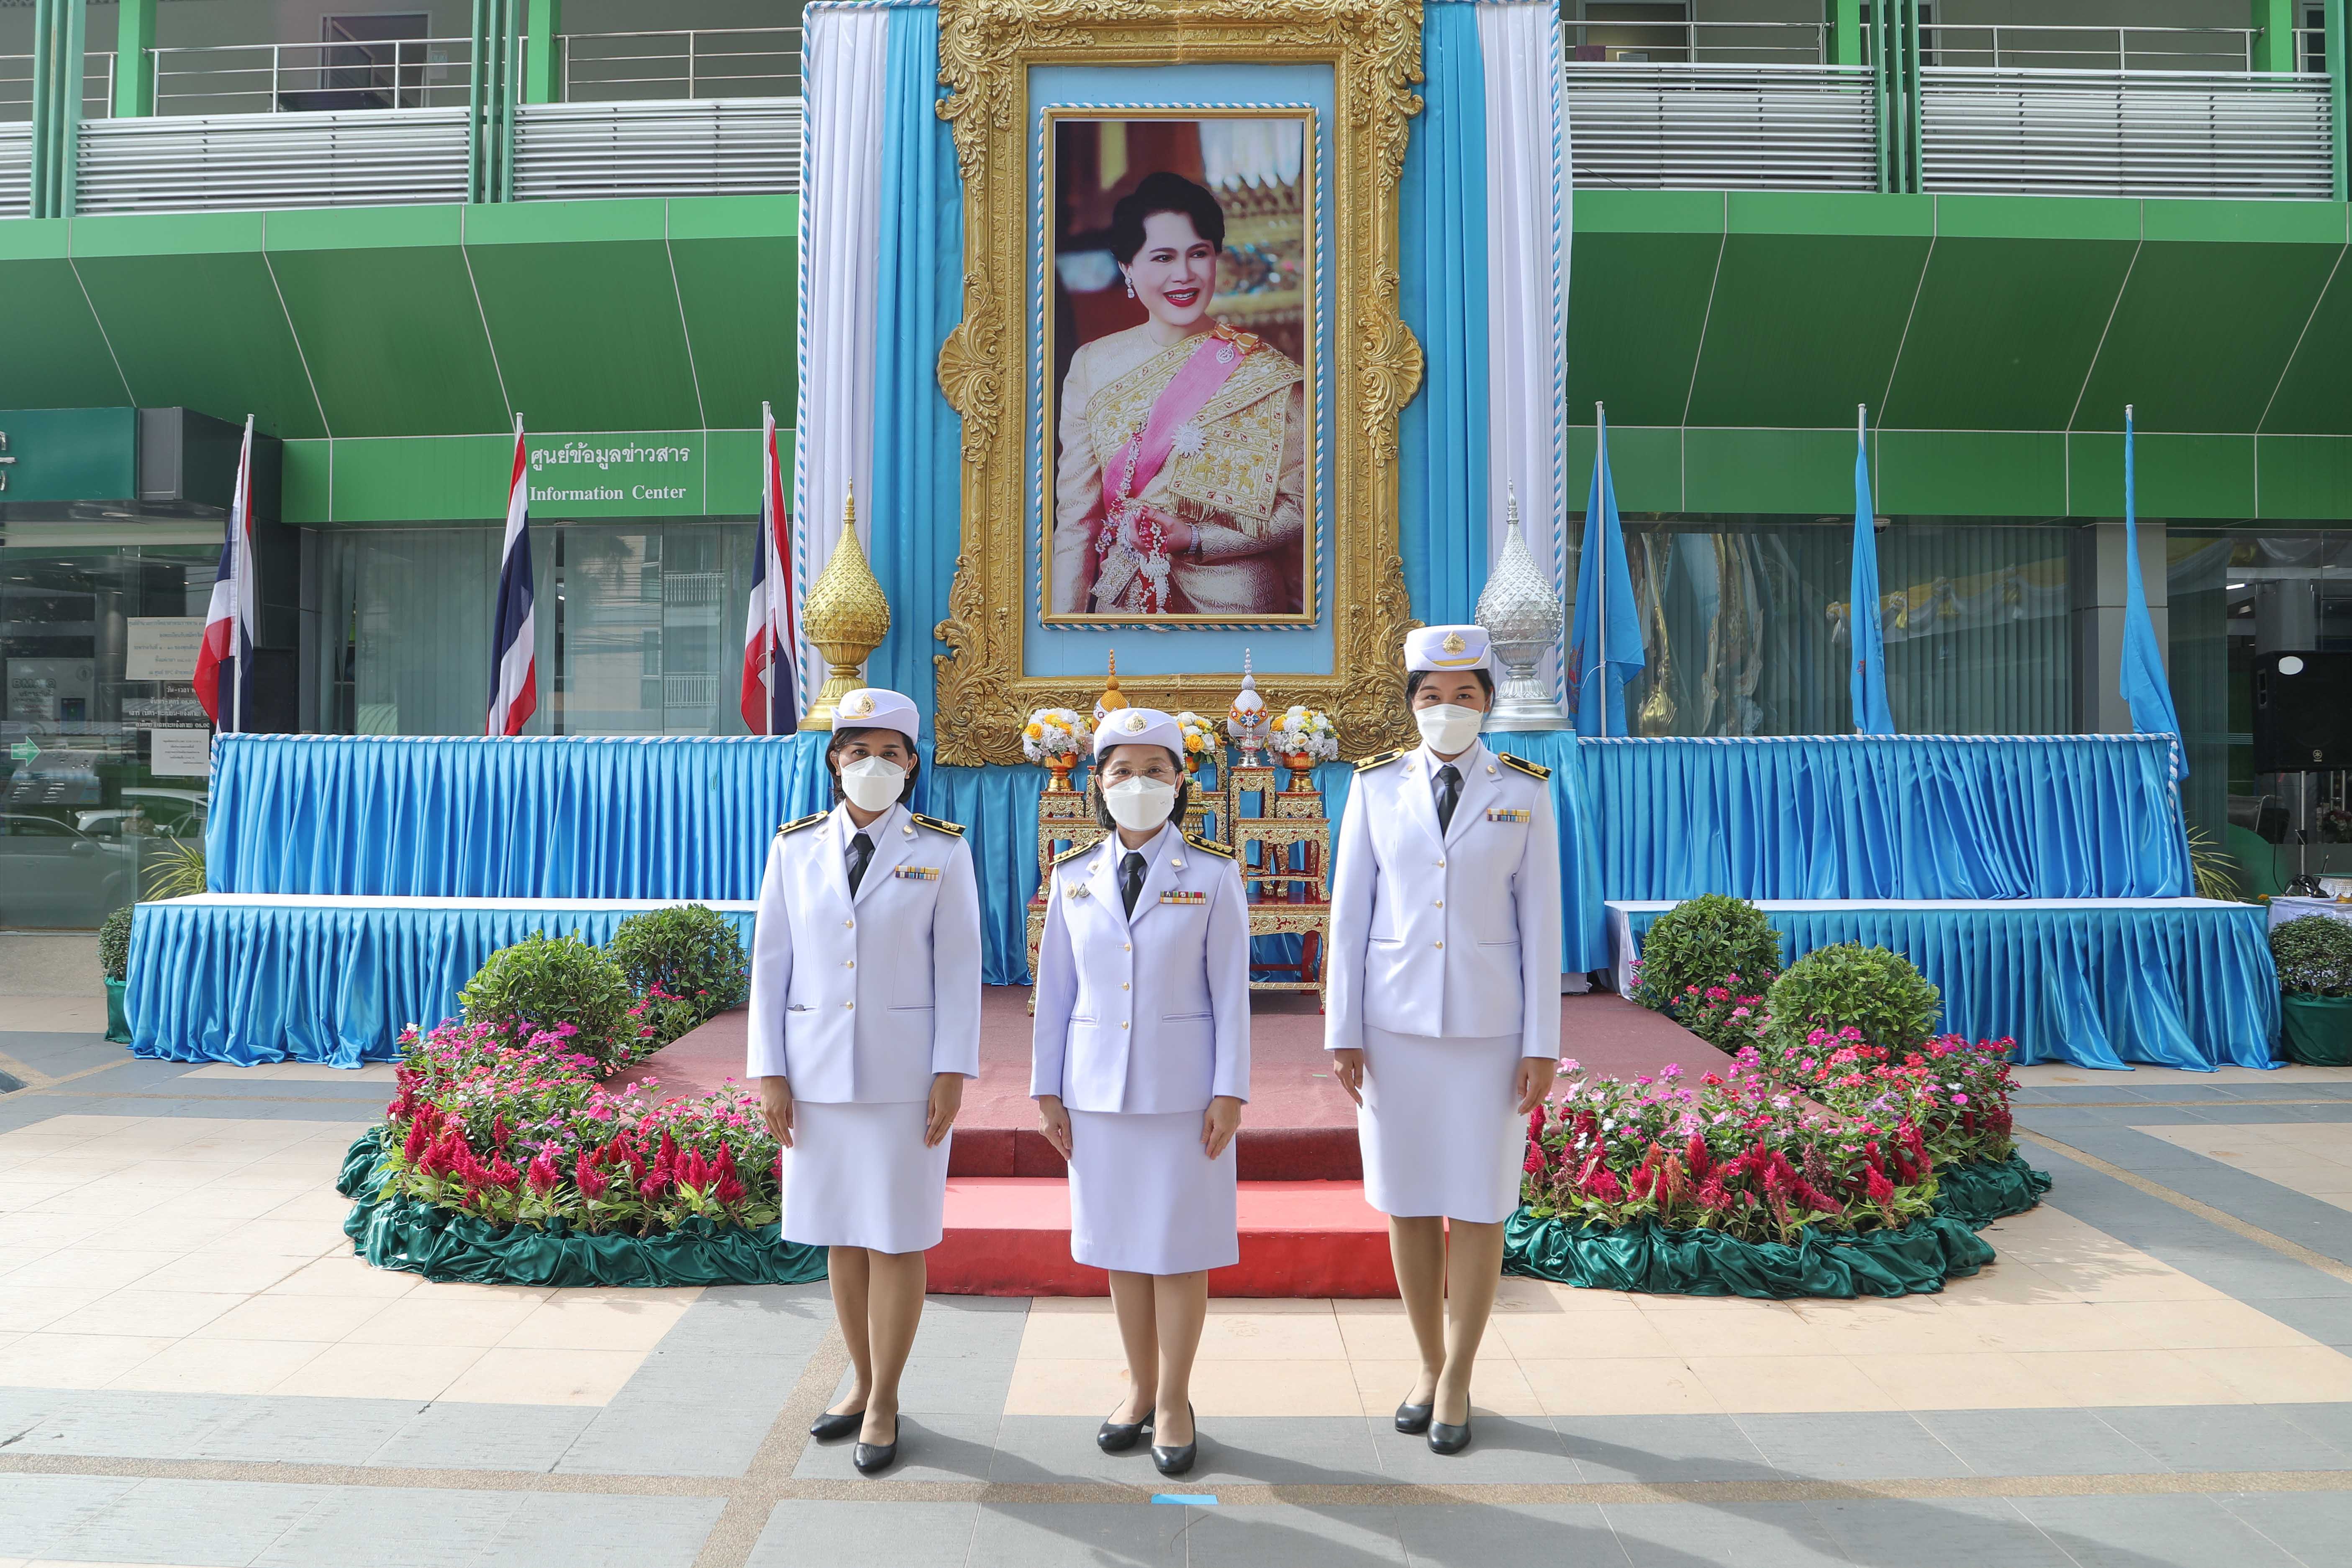 EXIM Thailand Joins Ceremony to Pay Tribute on Her Majesty Queen Sirikit The Queen Mother’s 90th Birthday on August 12, 2022